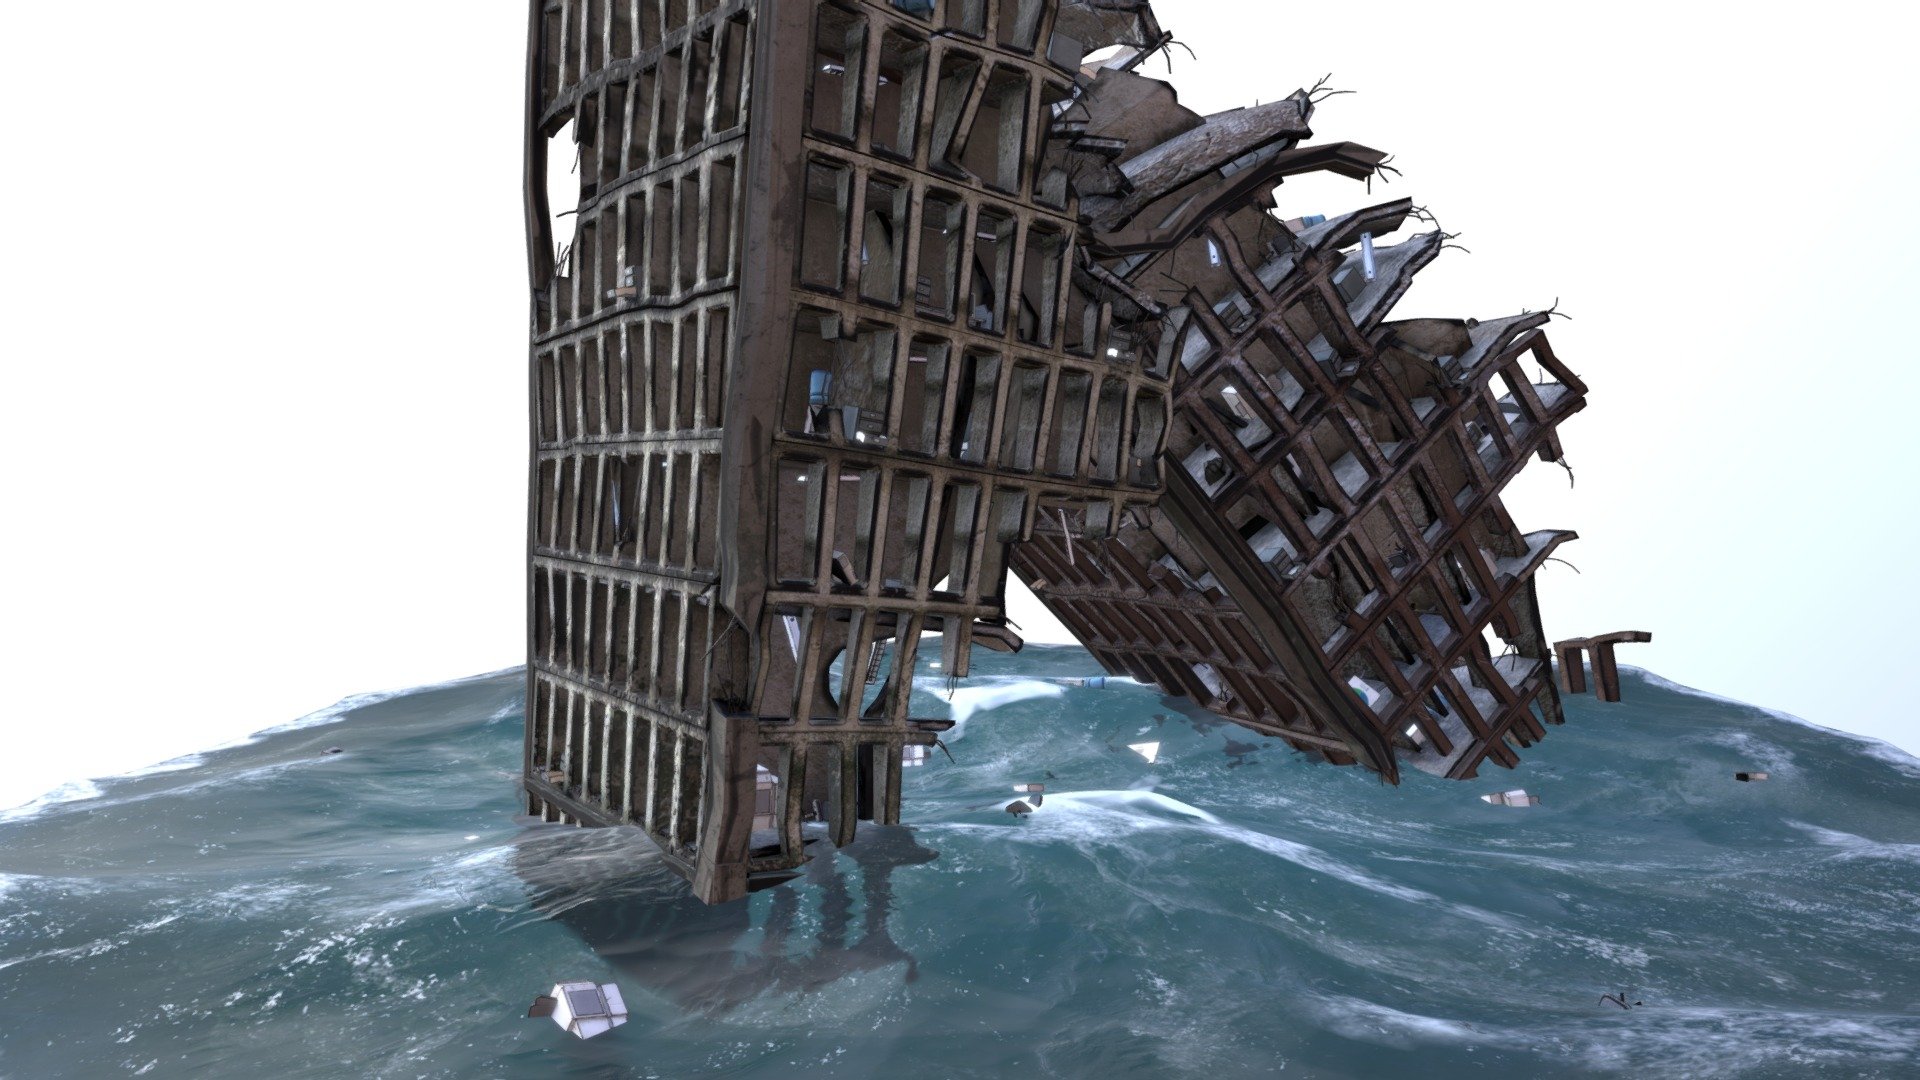 Fallen towers, I've created this prop for the flooded apocalyptic world of Sam &amp; Dan: Floaty Flatmates. In the game you try to reach a boat. Once arrived on the boat you will drive through the hole in the building, seeing into the offices 3d model